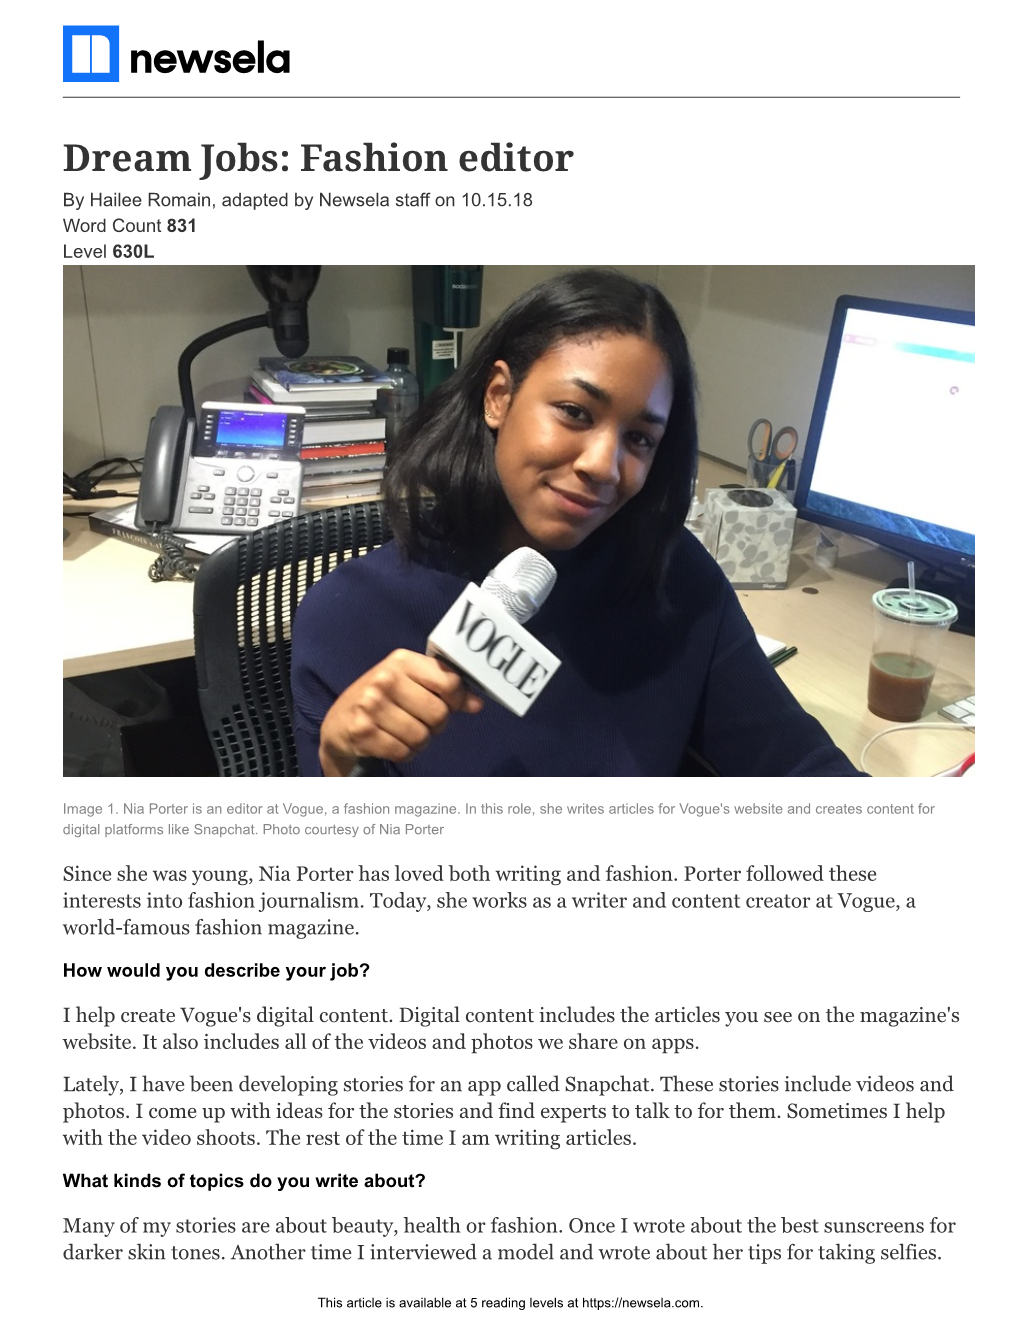 Dream Jobs: Fashion Editor by Hailee Romain, Adapted by Newsela Staff on 10.15.18 Word Count 831 Level 630L